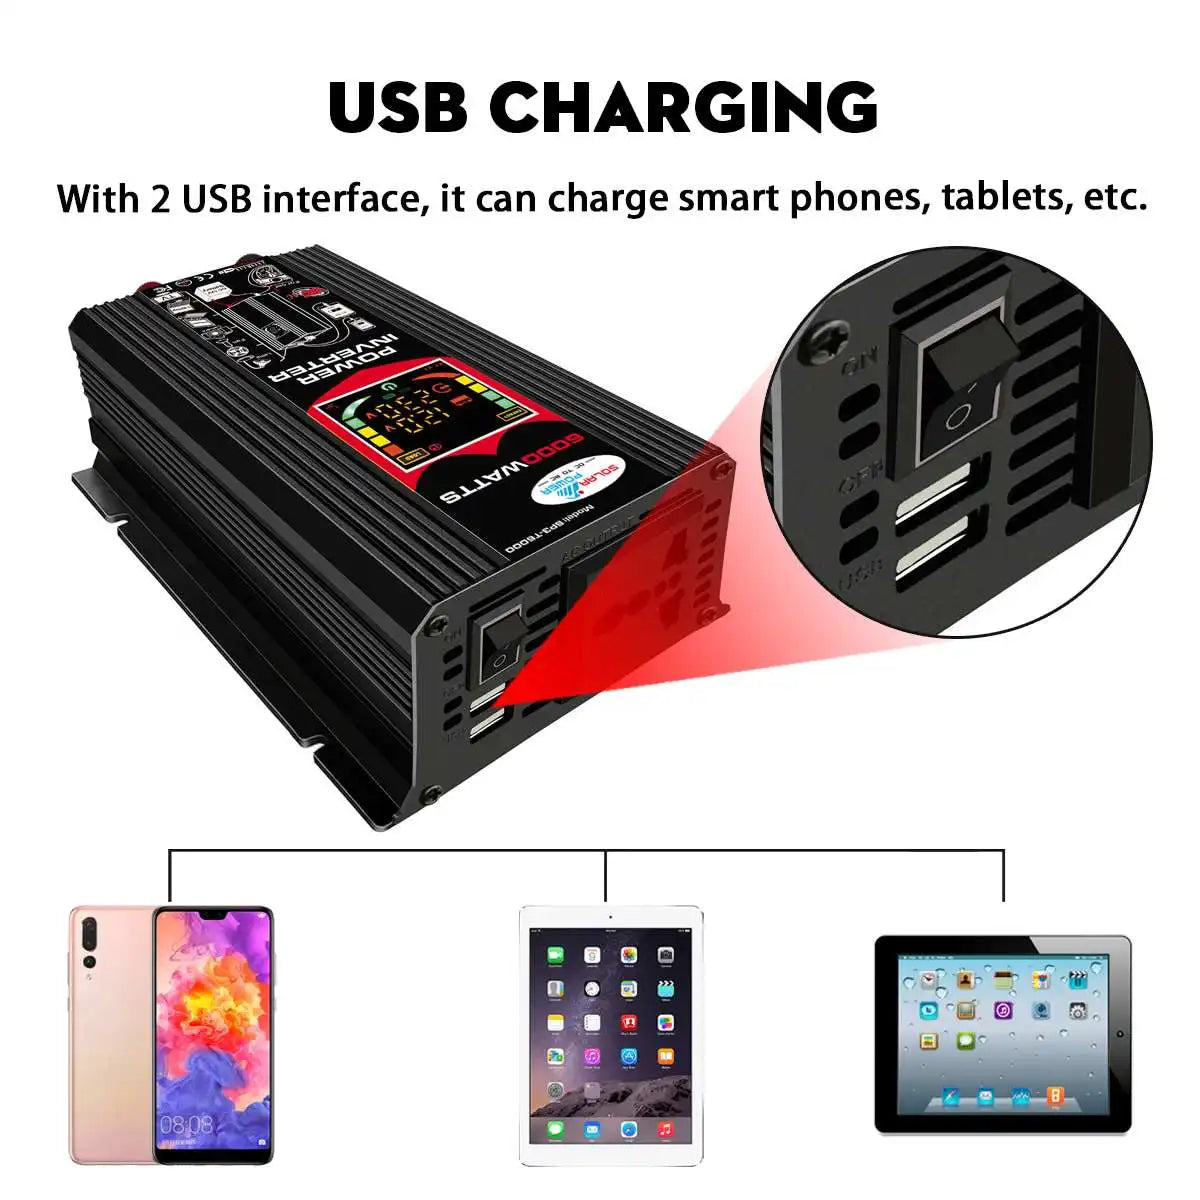 Two USB interfaces for charging smartphones, tablets, and other devices.